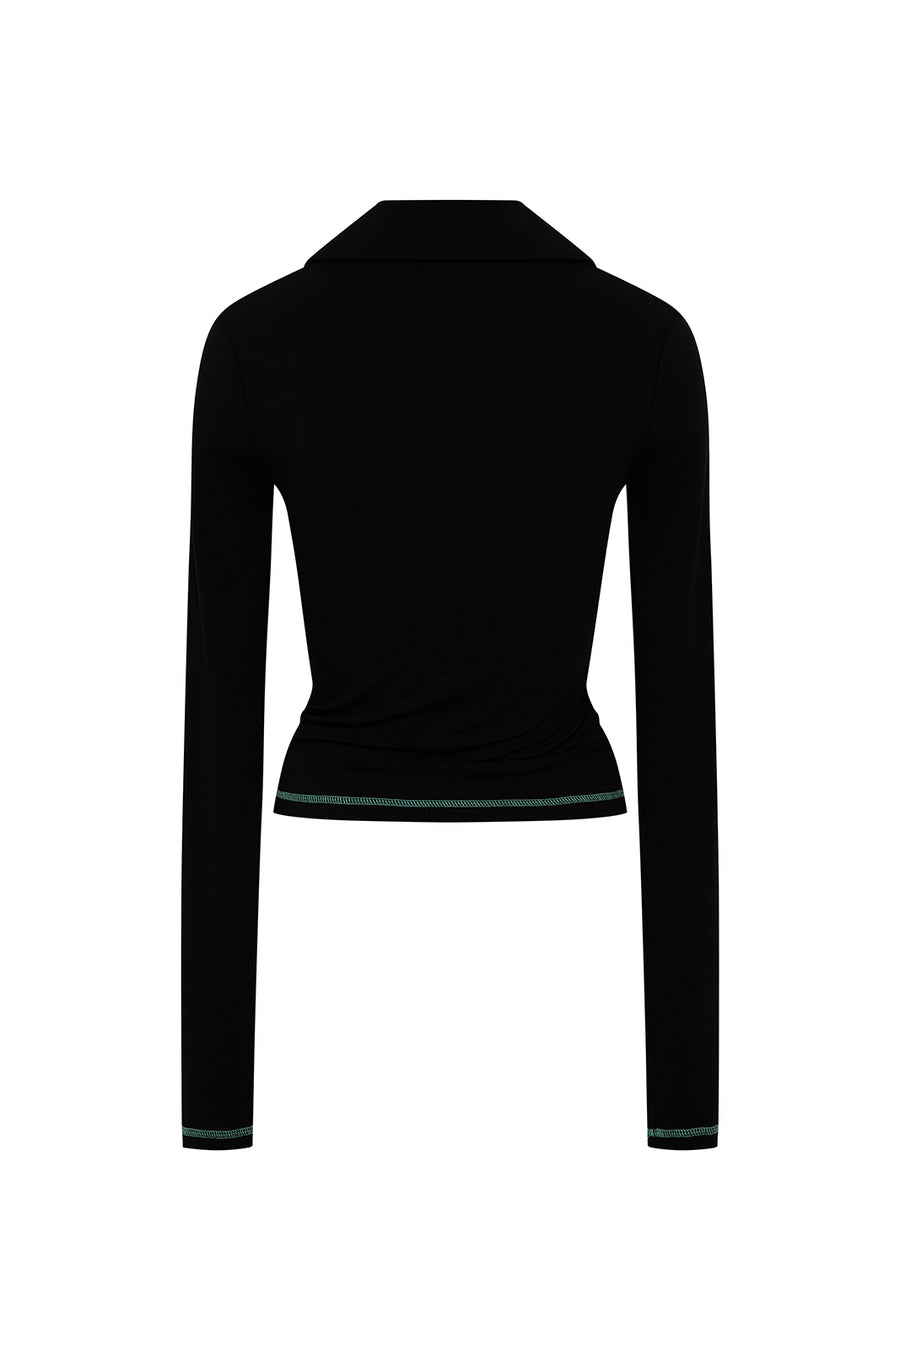 DUO - Contrast stitch detailed jersey top